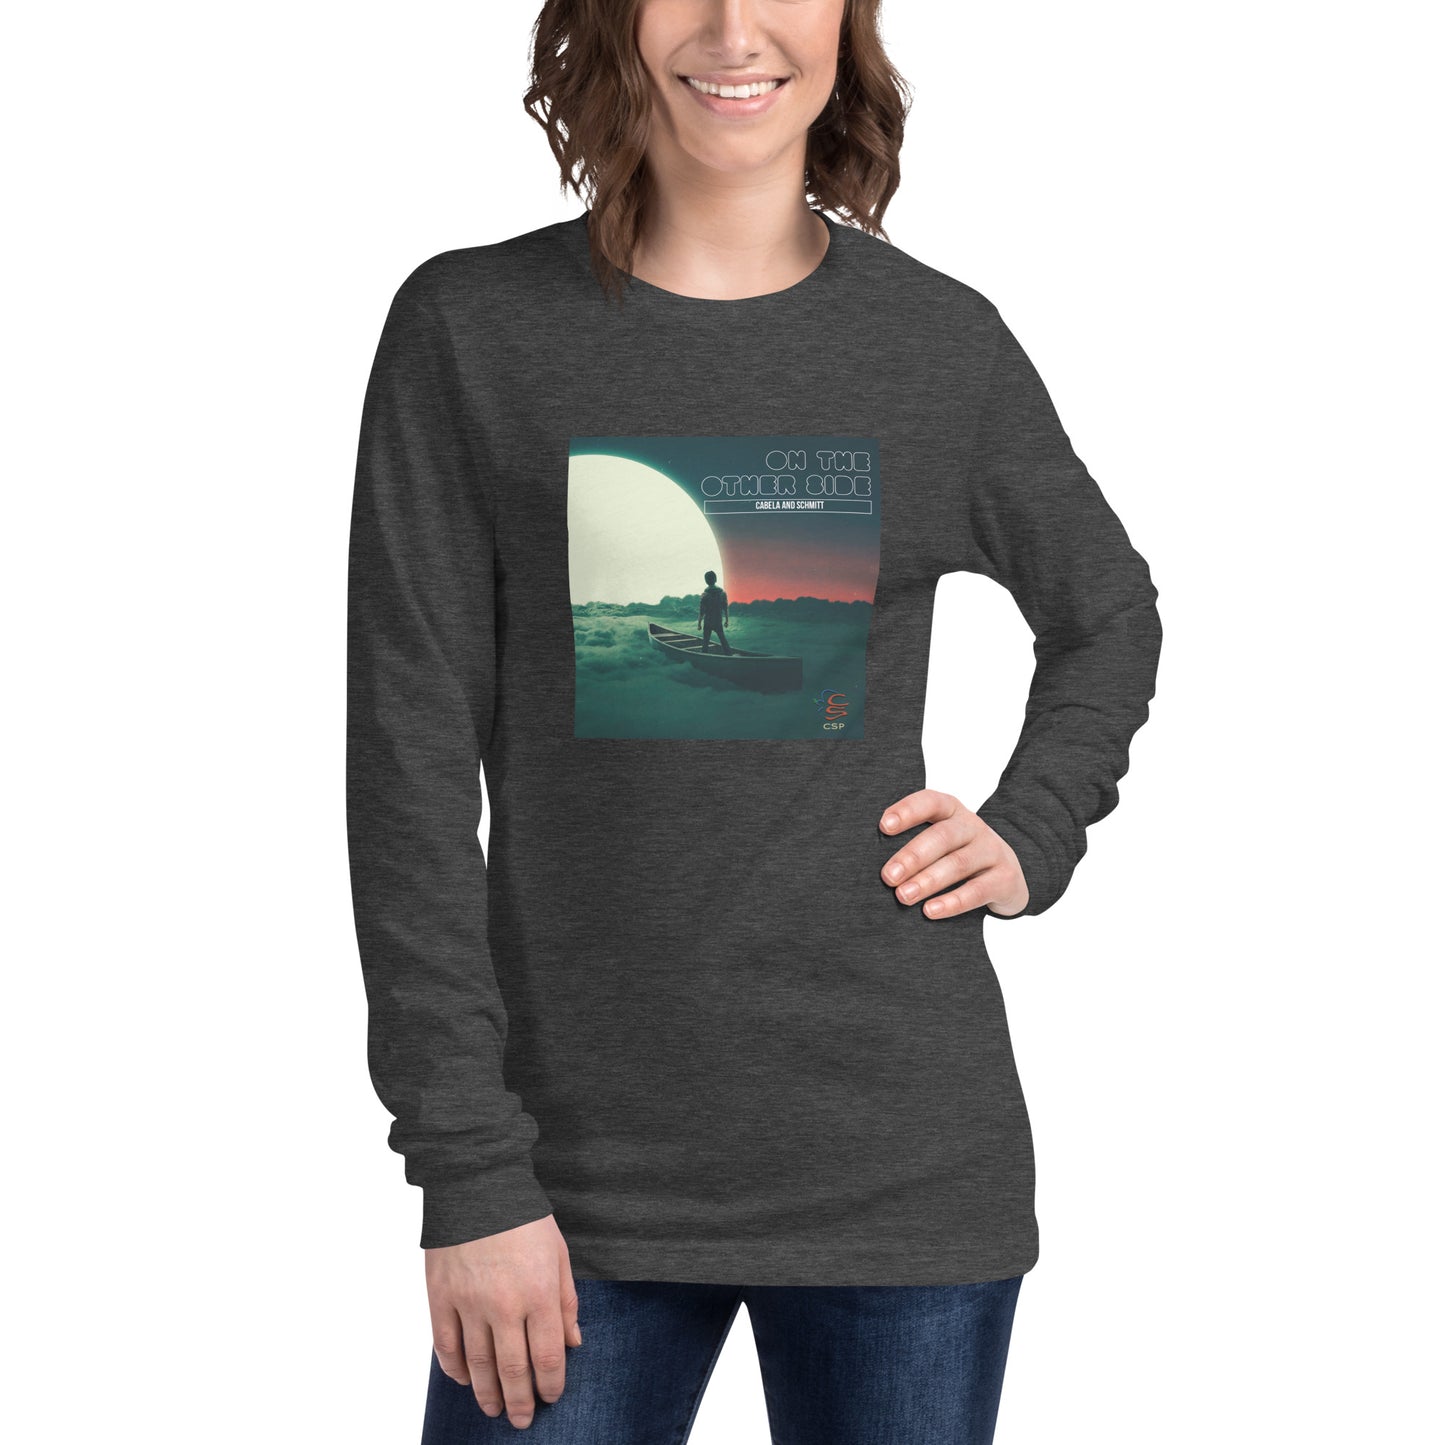 Unisex Long Sleeve Tee "On the Other Side"